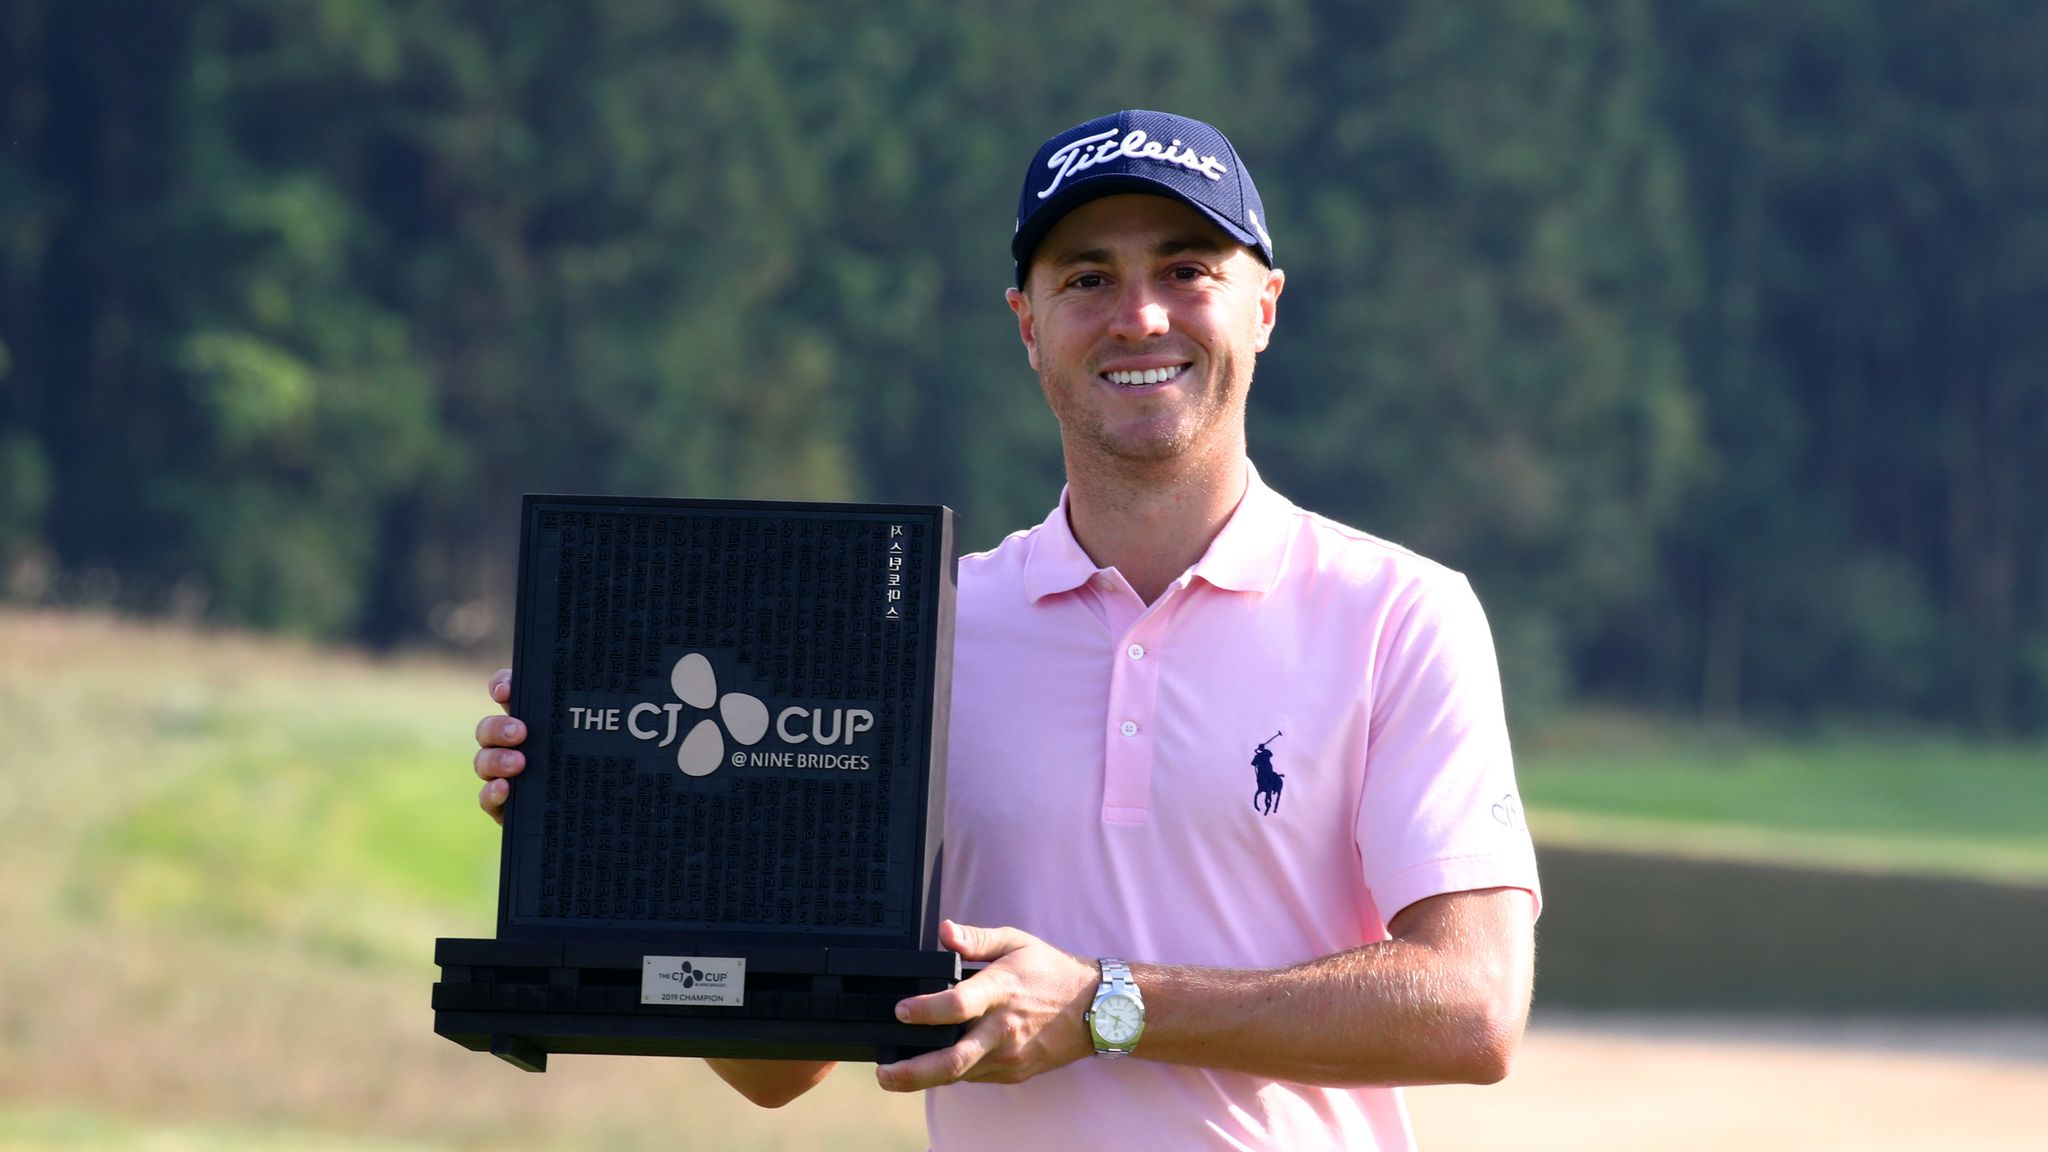 cj cup how to watch